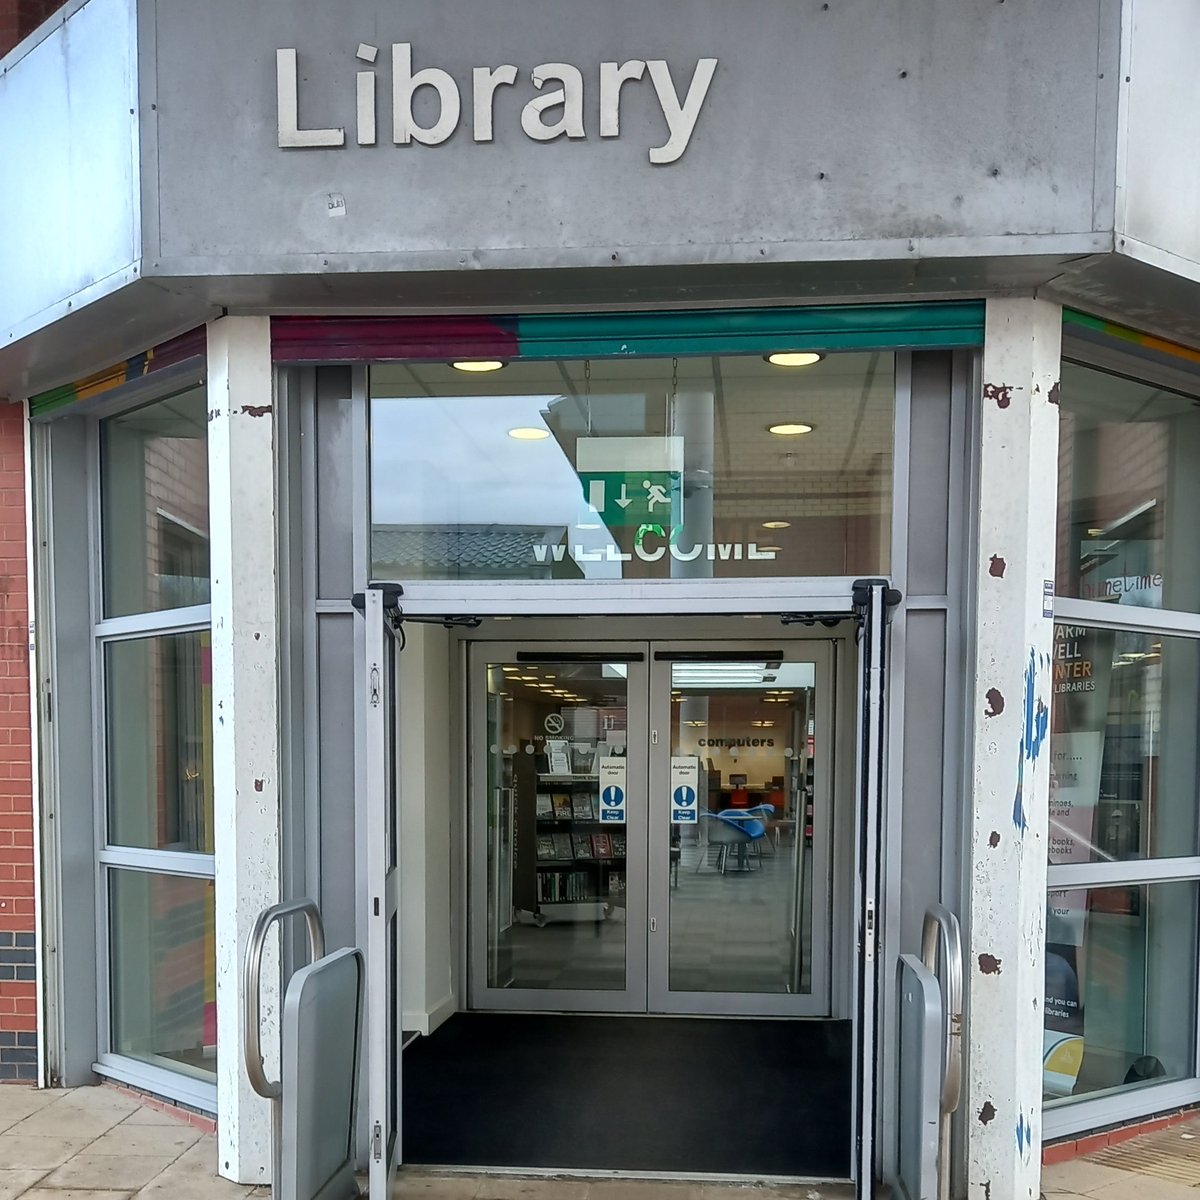 Runcorn Library will be closed today due to essential groundworks. We are sorry for any inconvenience. It will open again tomorrow library.haltonbc.info